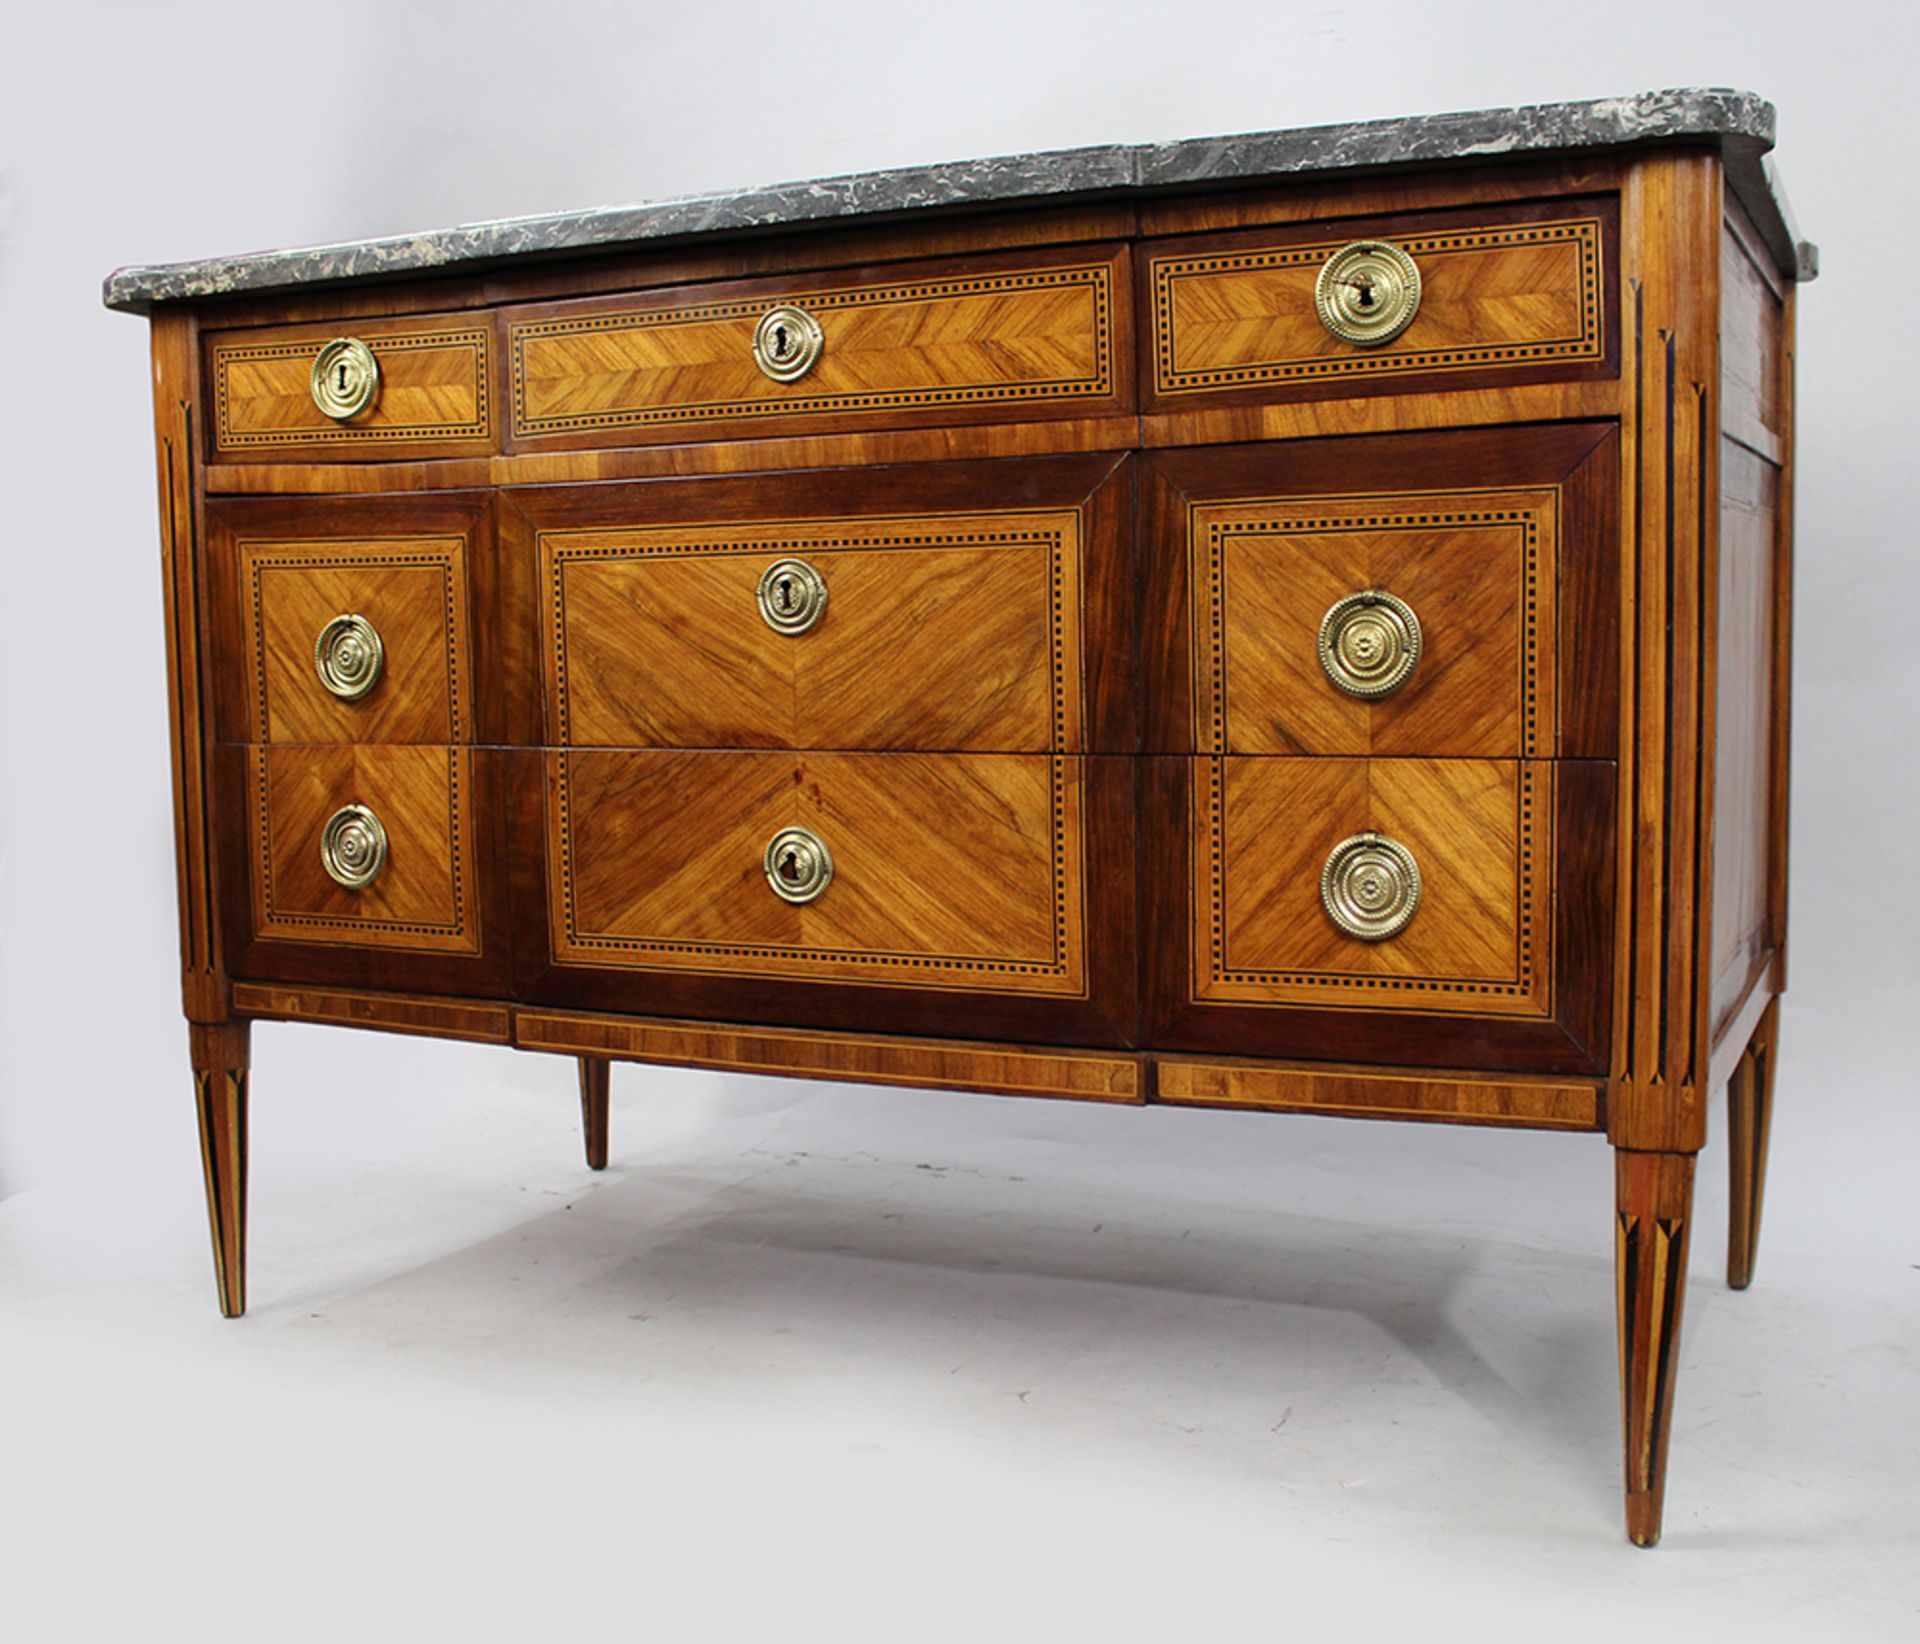 18th c. Inlaid Marble Topped Commode - Image 4 of 14